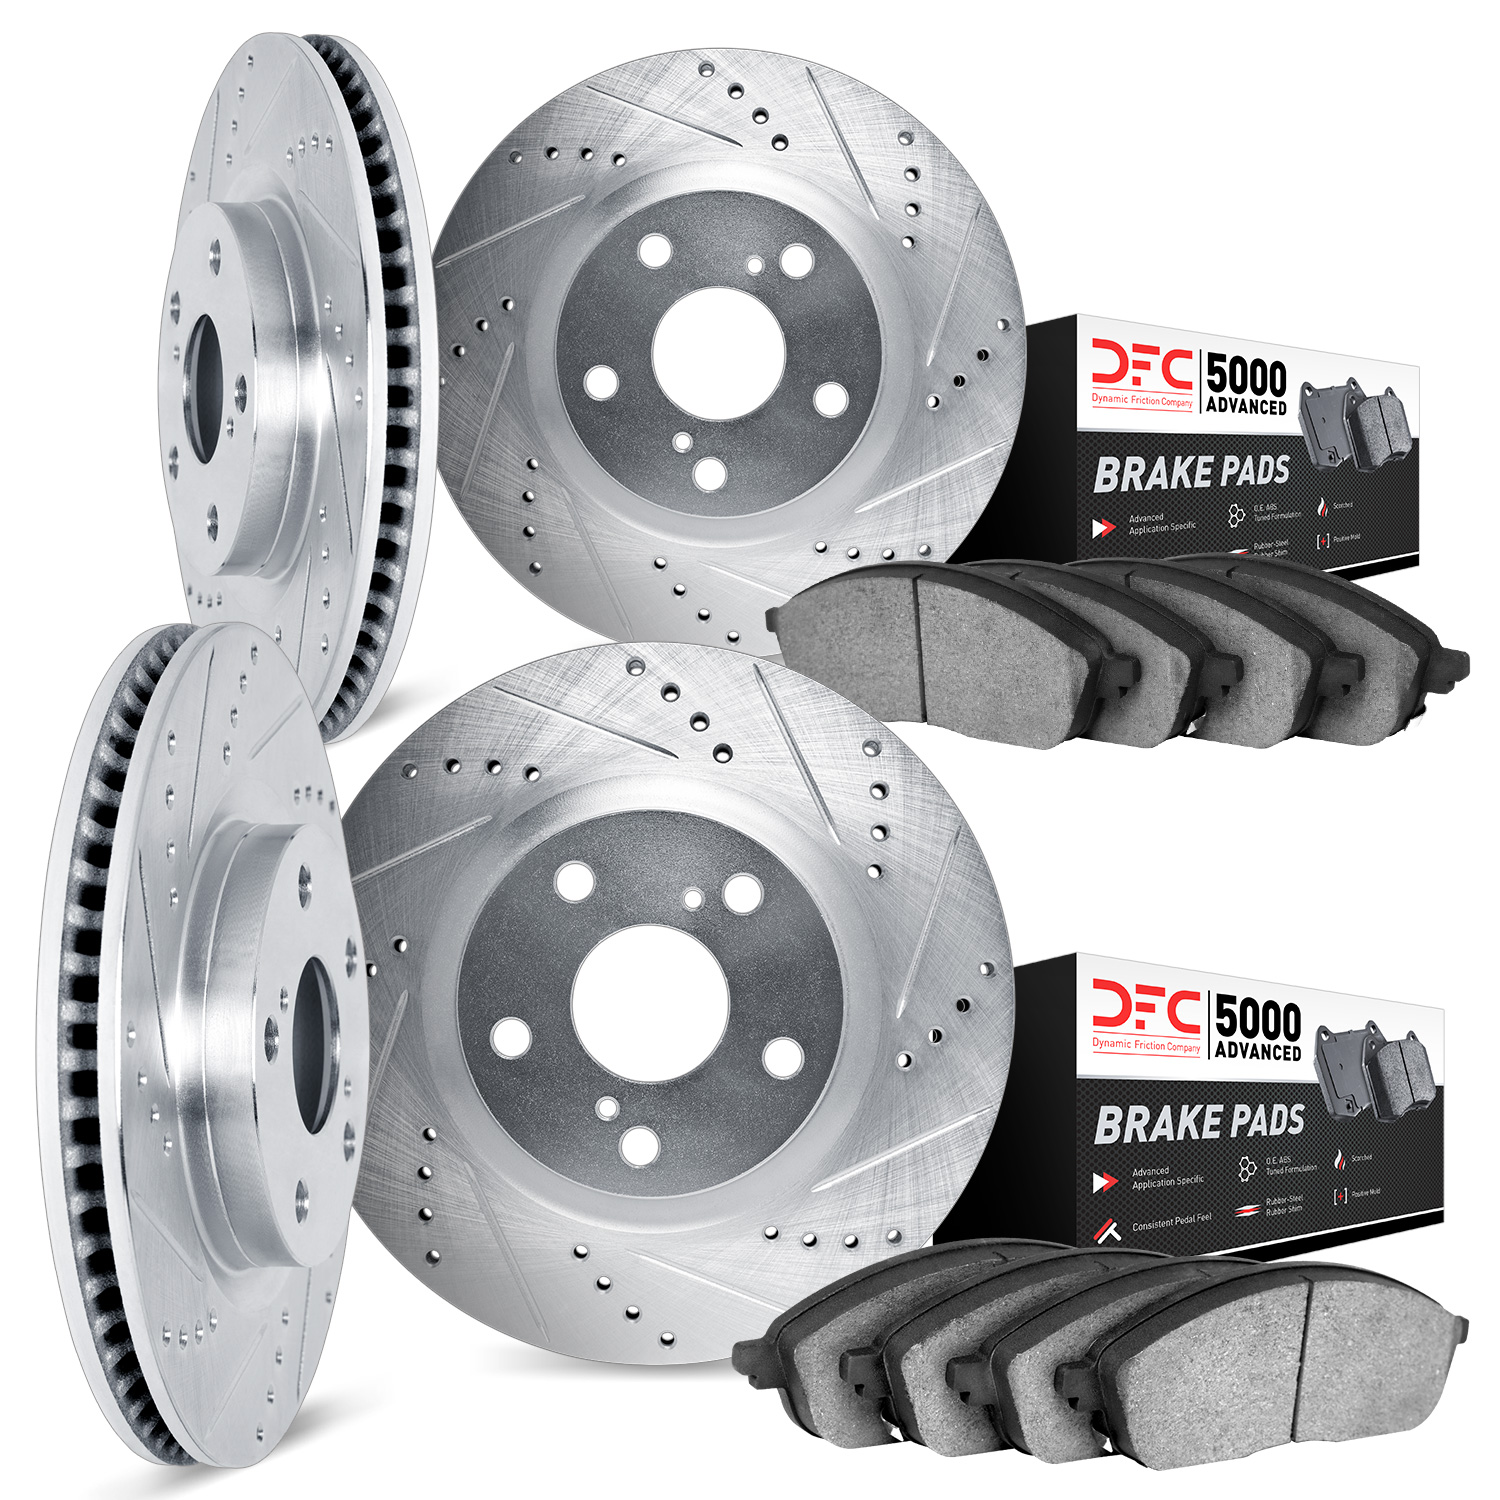 7504-40245 Drilled/Slotted Brake Rotors w/5000 Advanced Brake Pads Kit [Silver], 2005-2006 Mopar, Position: Front and Rear